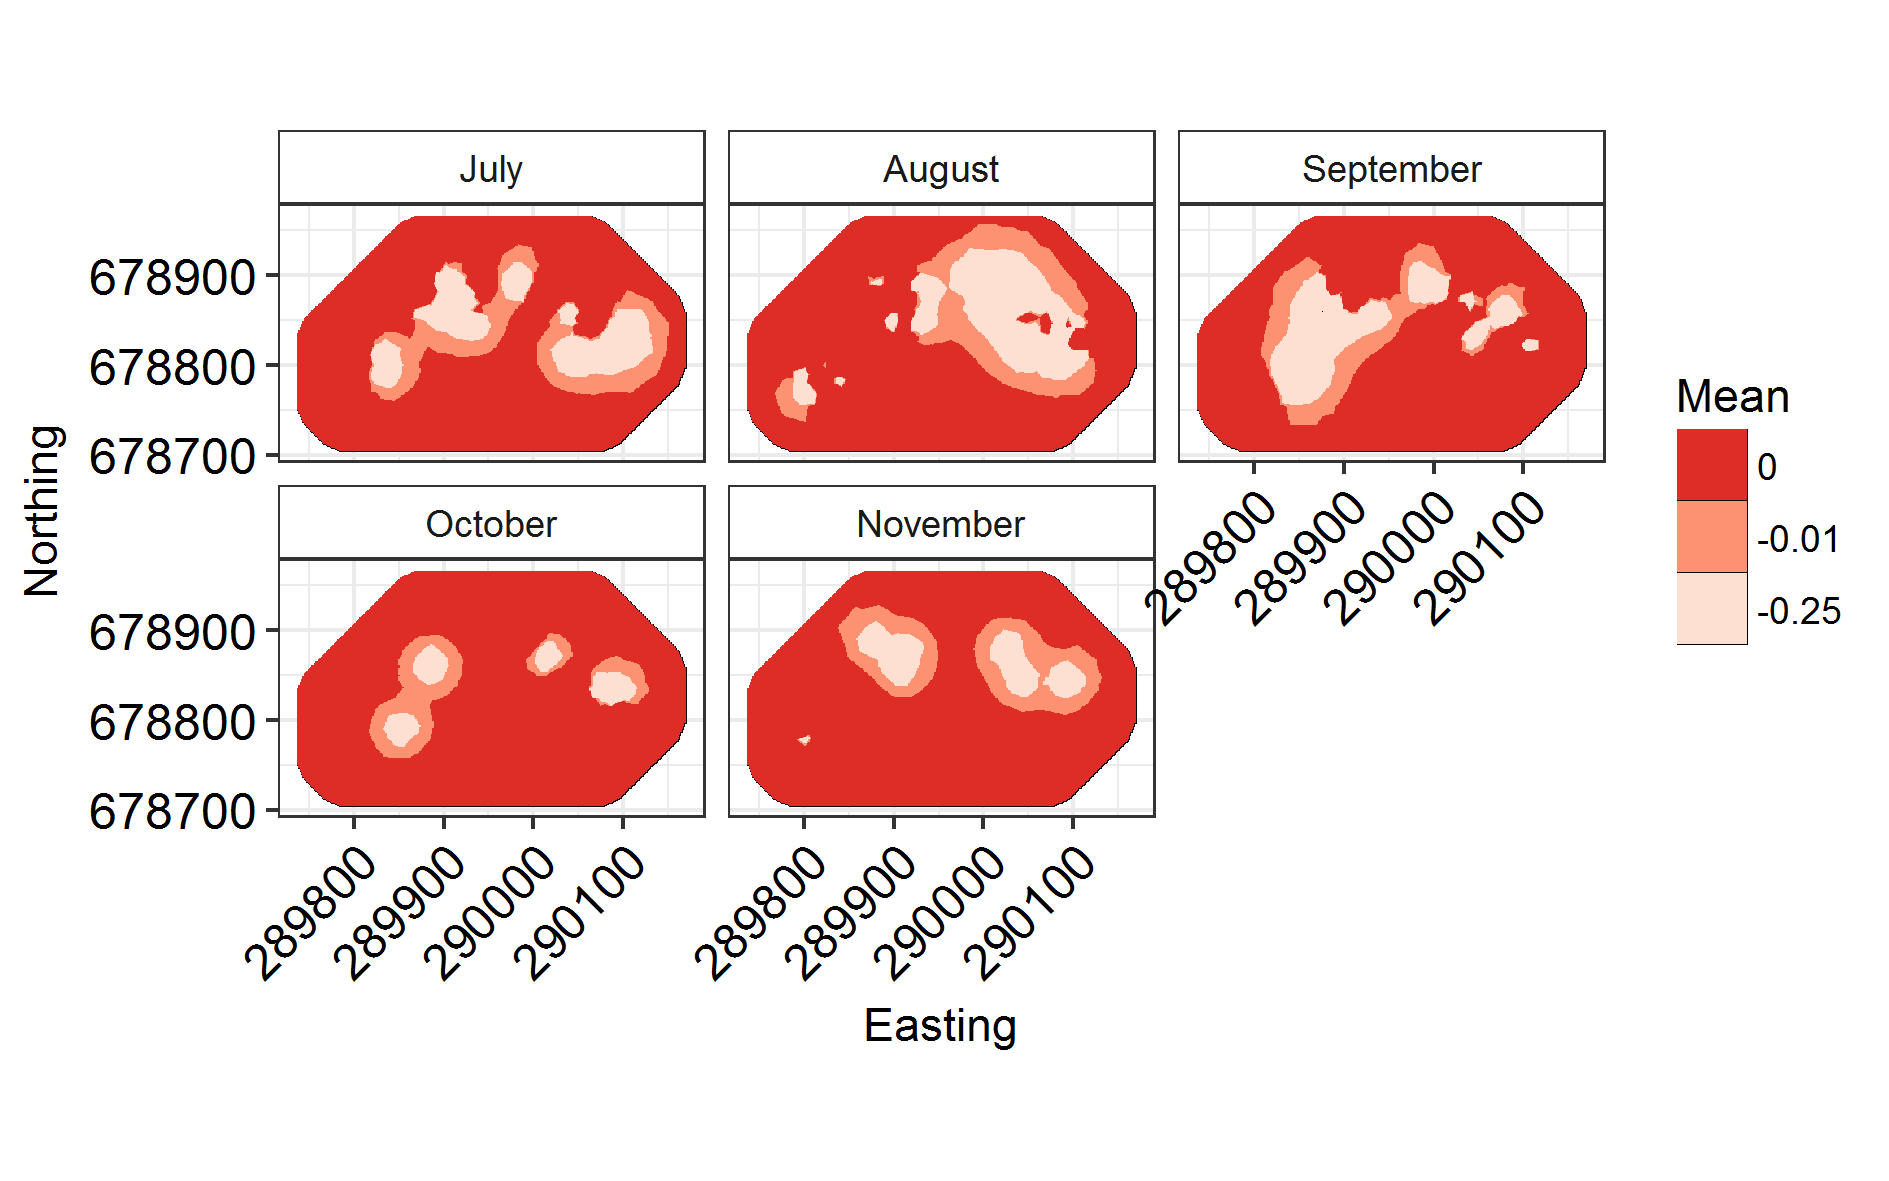 Facetted spatial field map by month